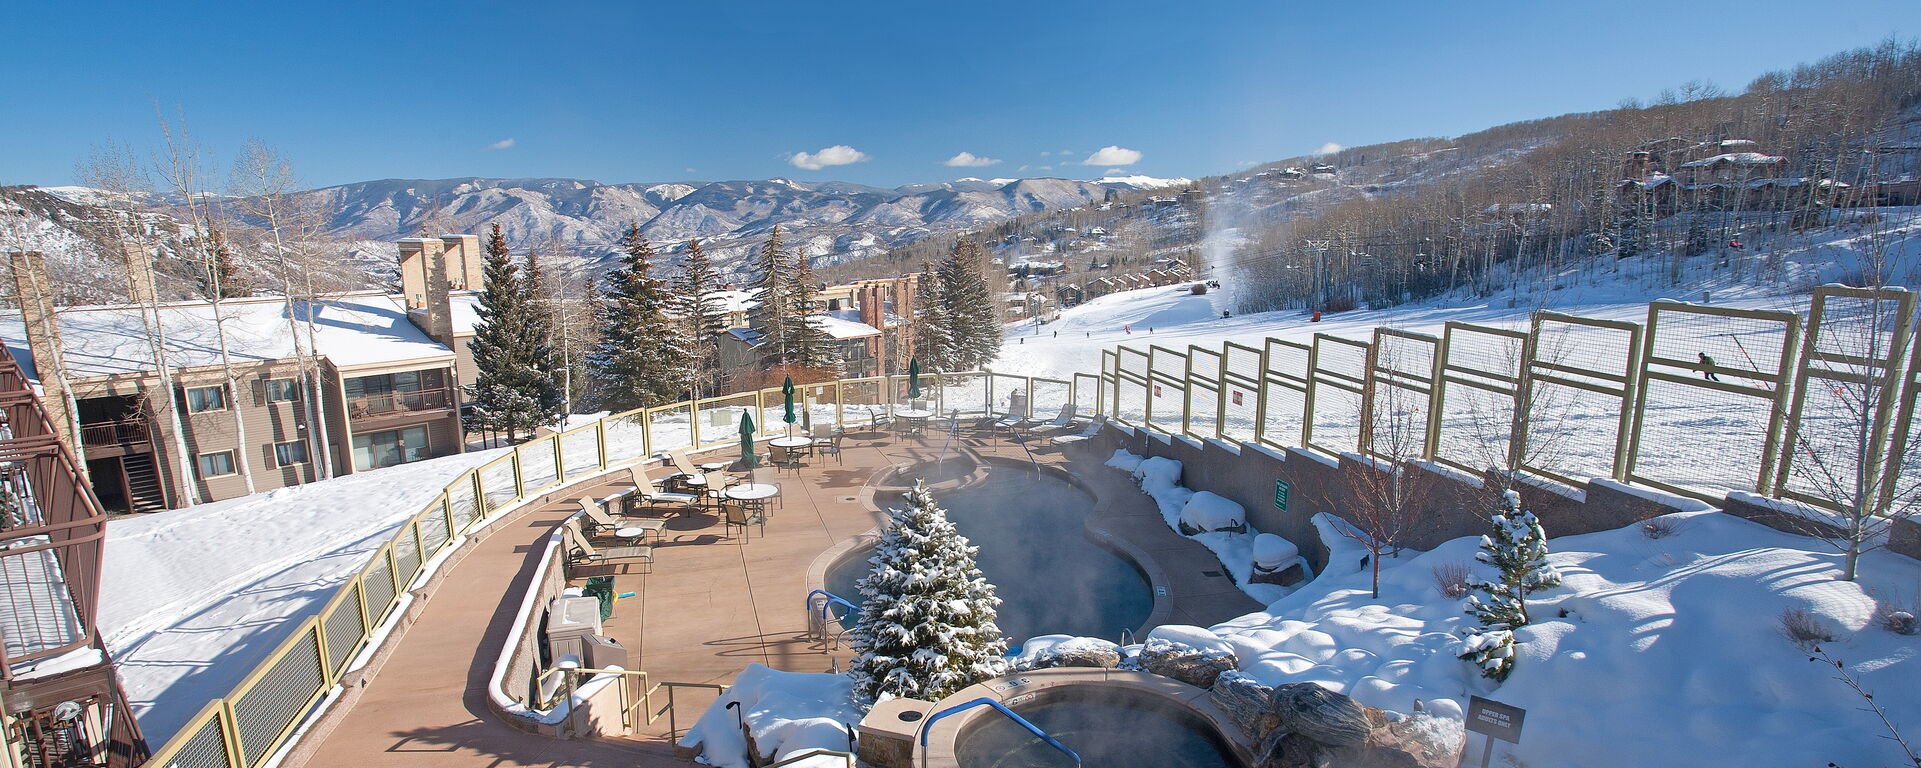 Book our VRBO Ski in Ski Out Rentals in Snowmass